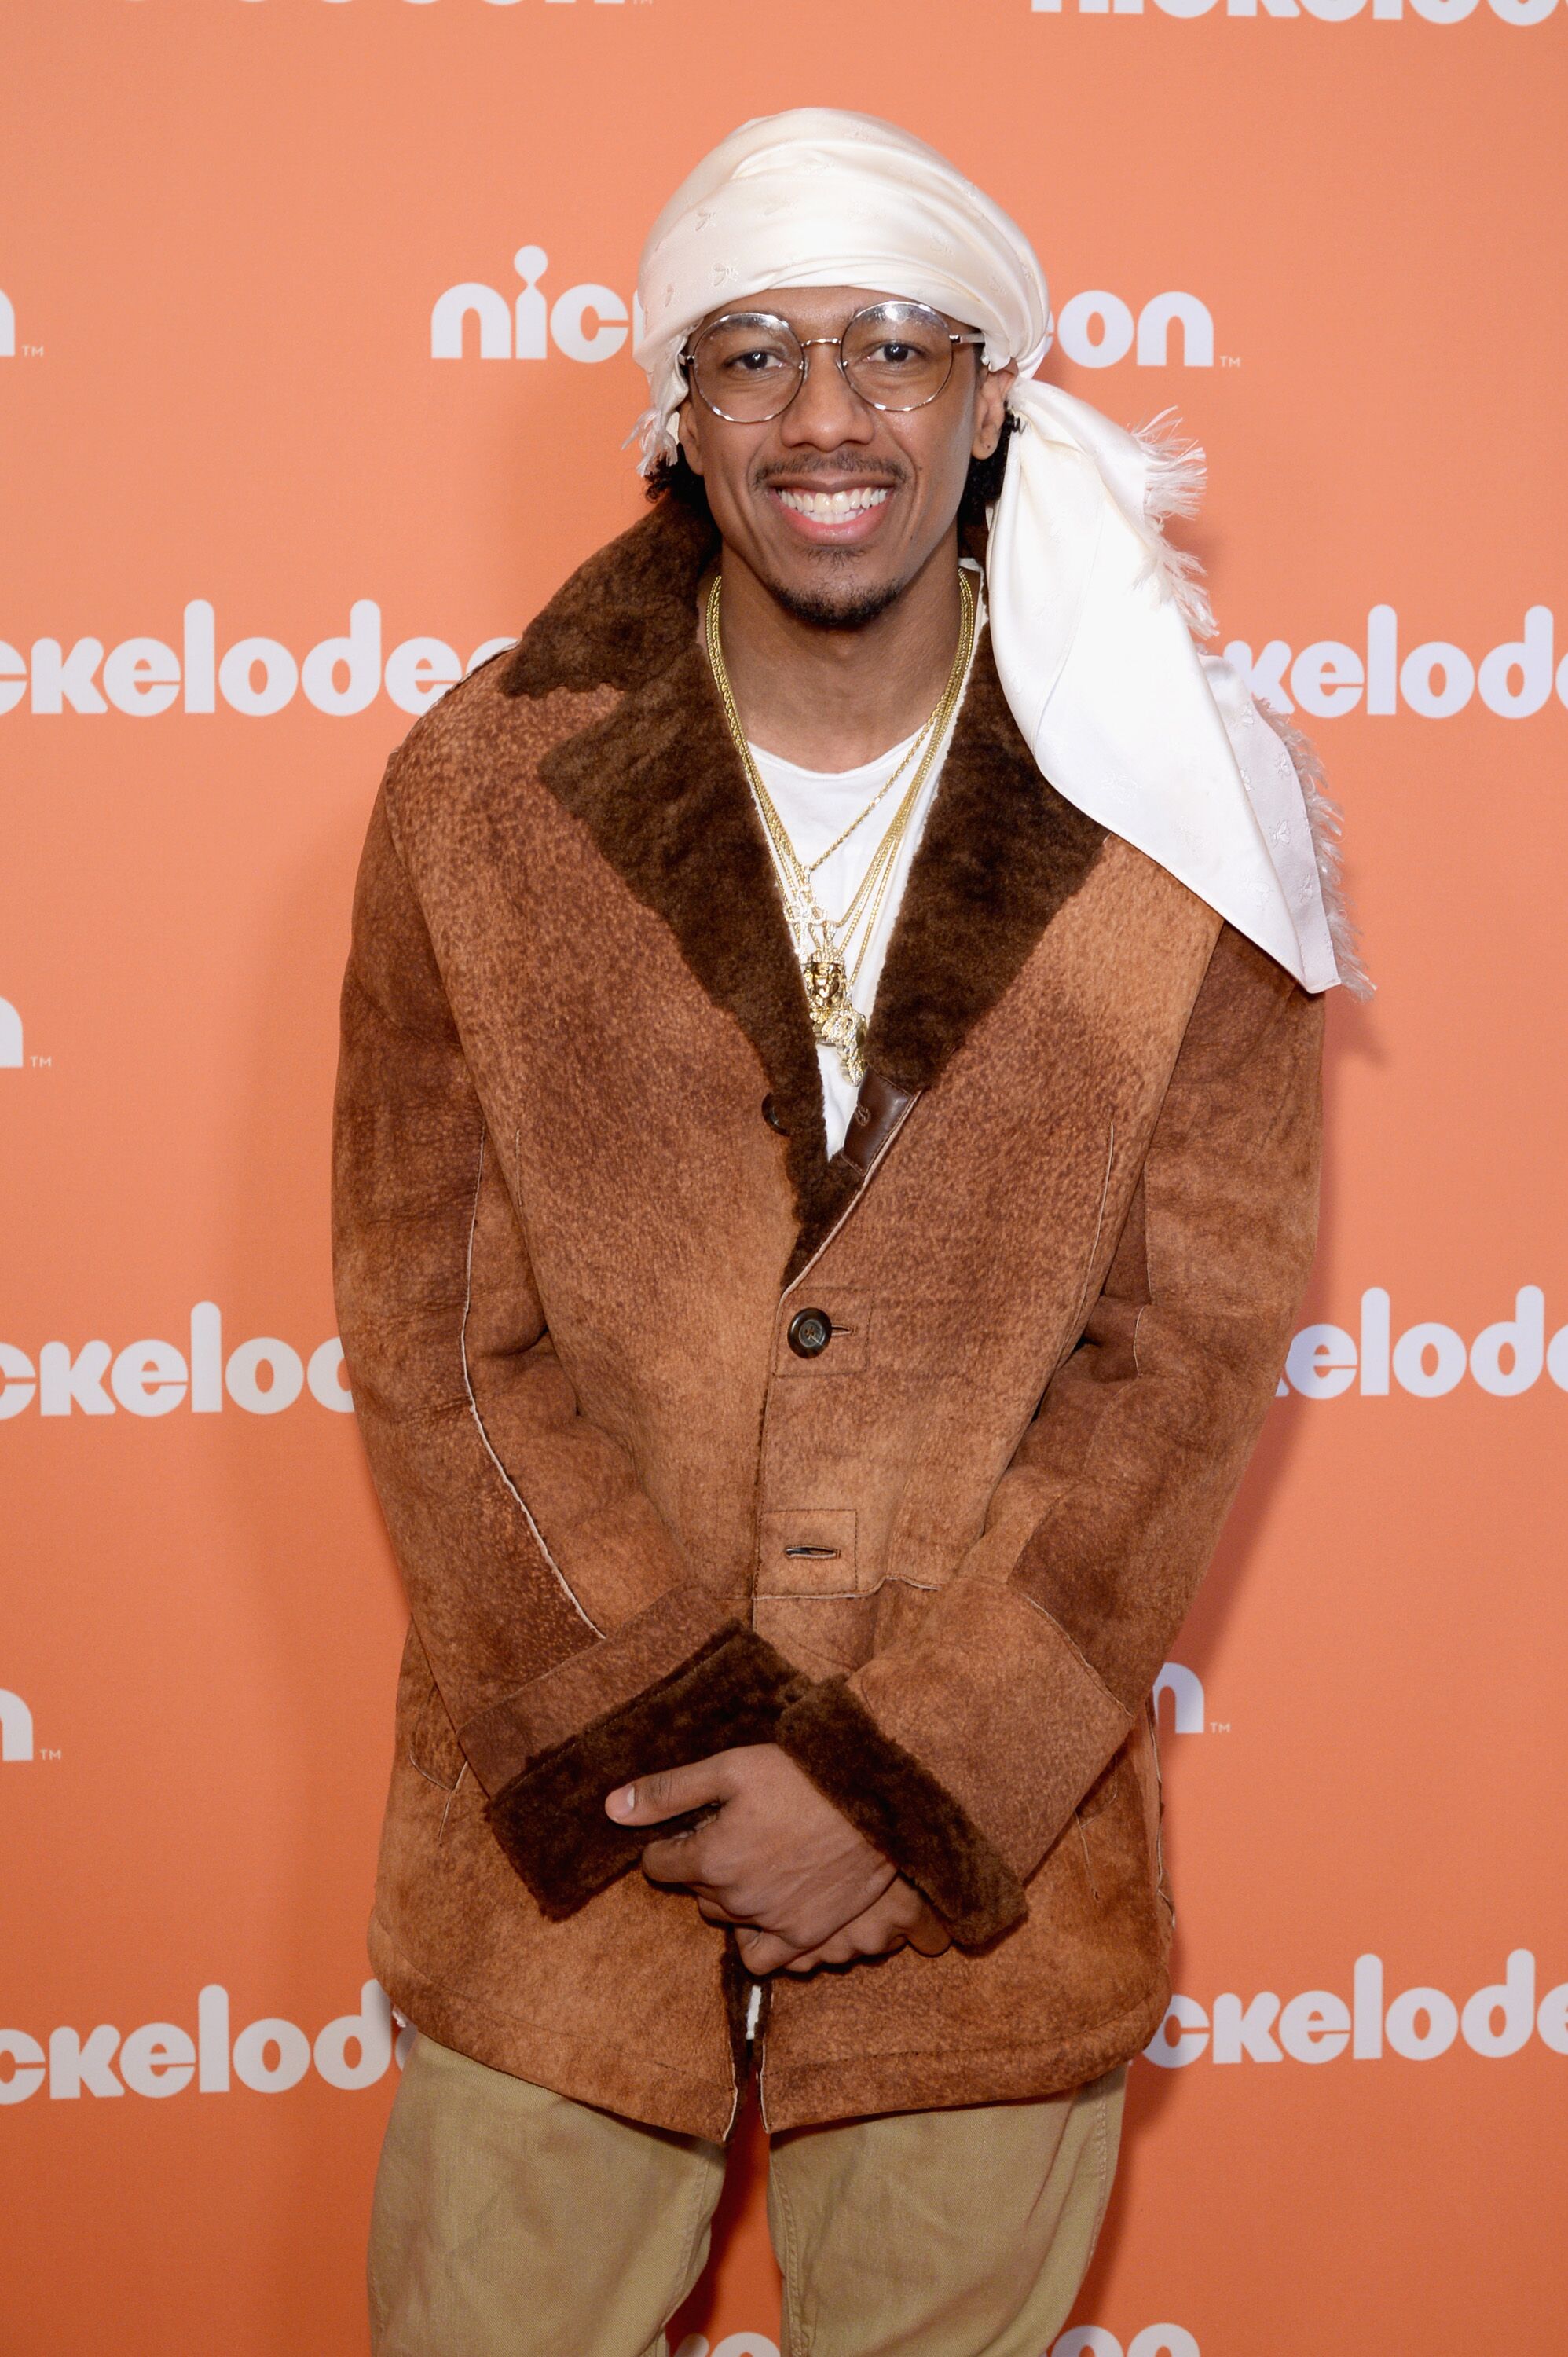 Nick Cannon posing at a Nickelodeon event | Source: Getty Images/GlobalImagesUkraine